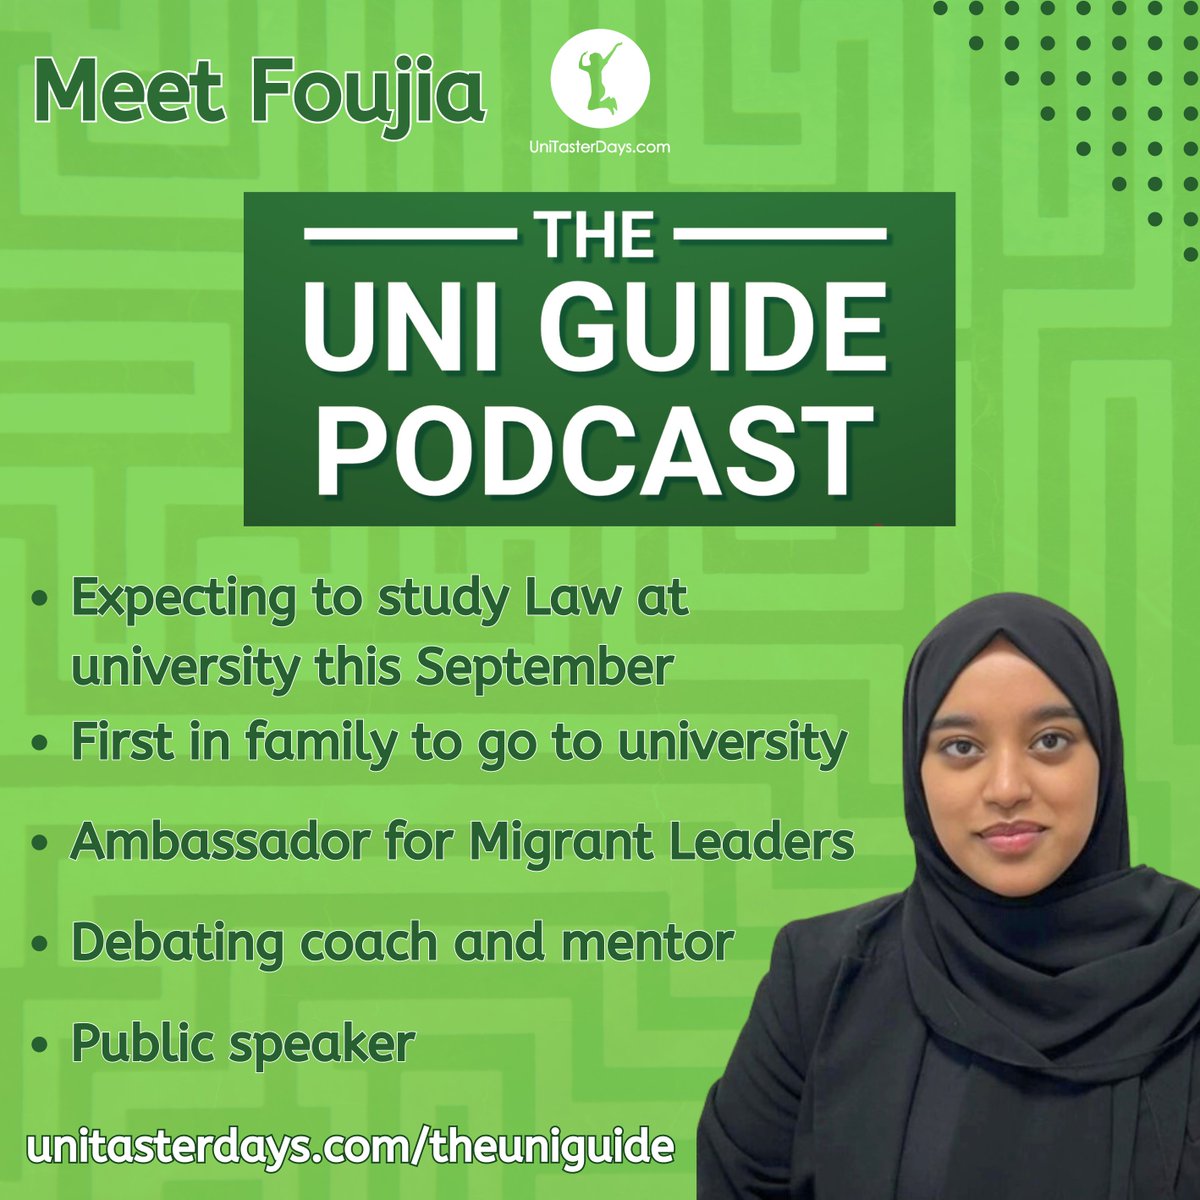 Meet Foujia, the newest member of the Uni Guide #Podcast panel! She's hoping to study #Law this year. Foujia features on the latest episode, talking university #accommodation. We'll hear from Foujia throughout her studies, supporting students considering #university #UTDIAG